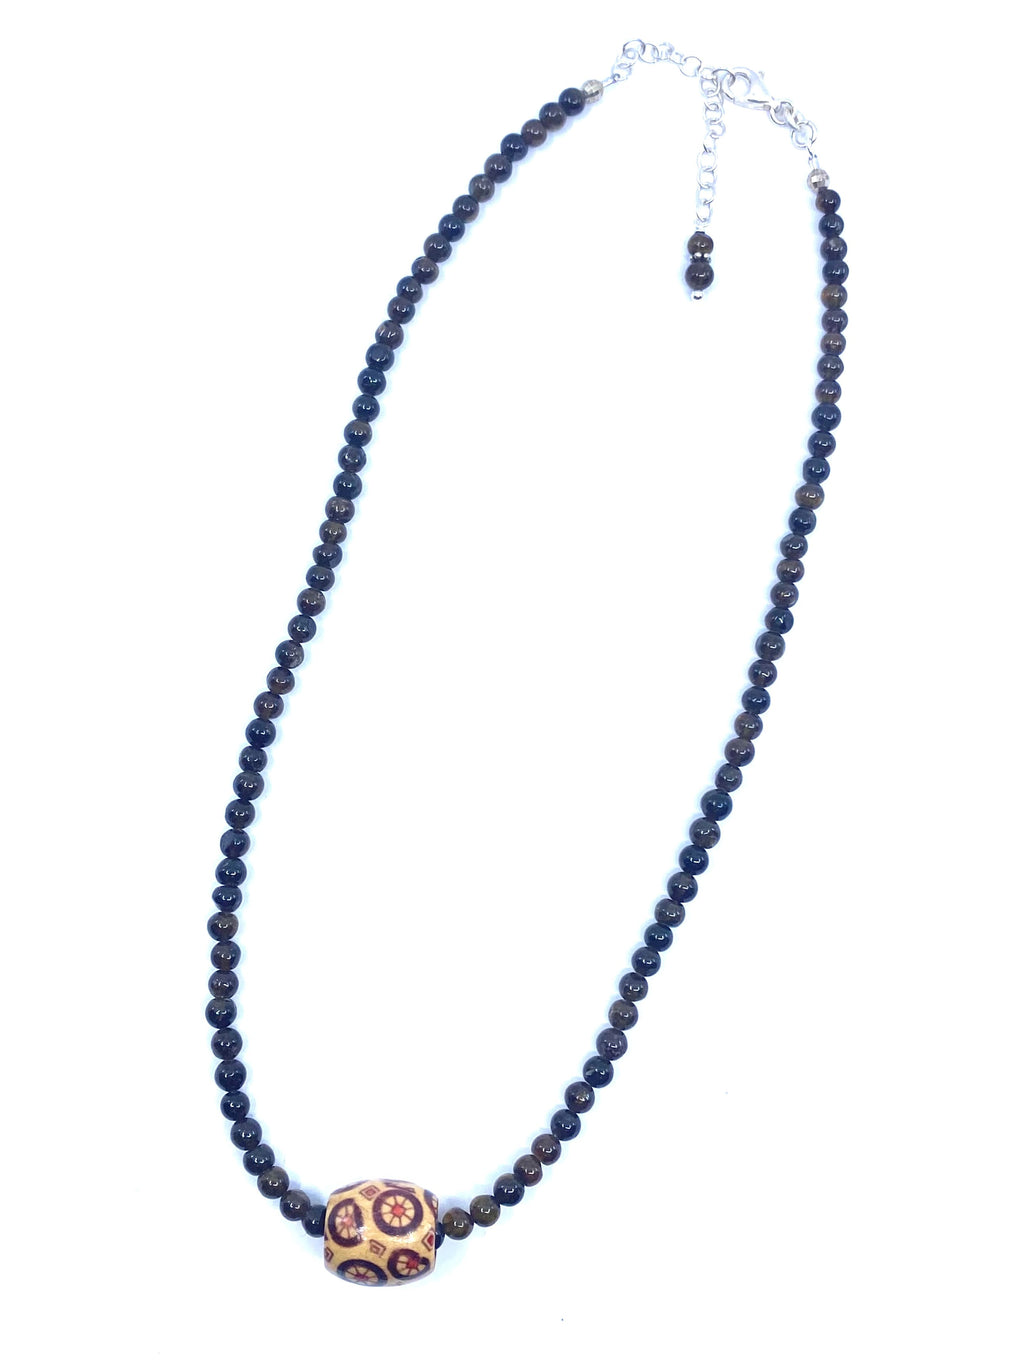 Lovely Smoky Quartz Beaded Necklace with Painted Wooden Pendant